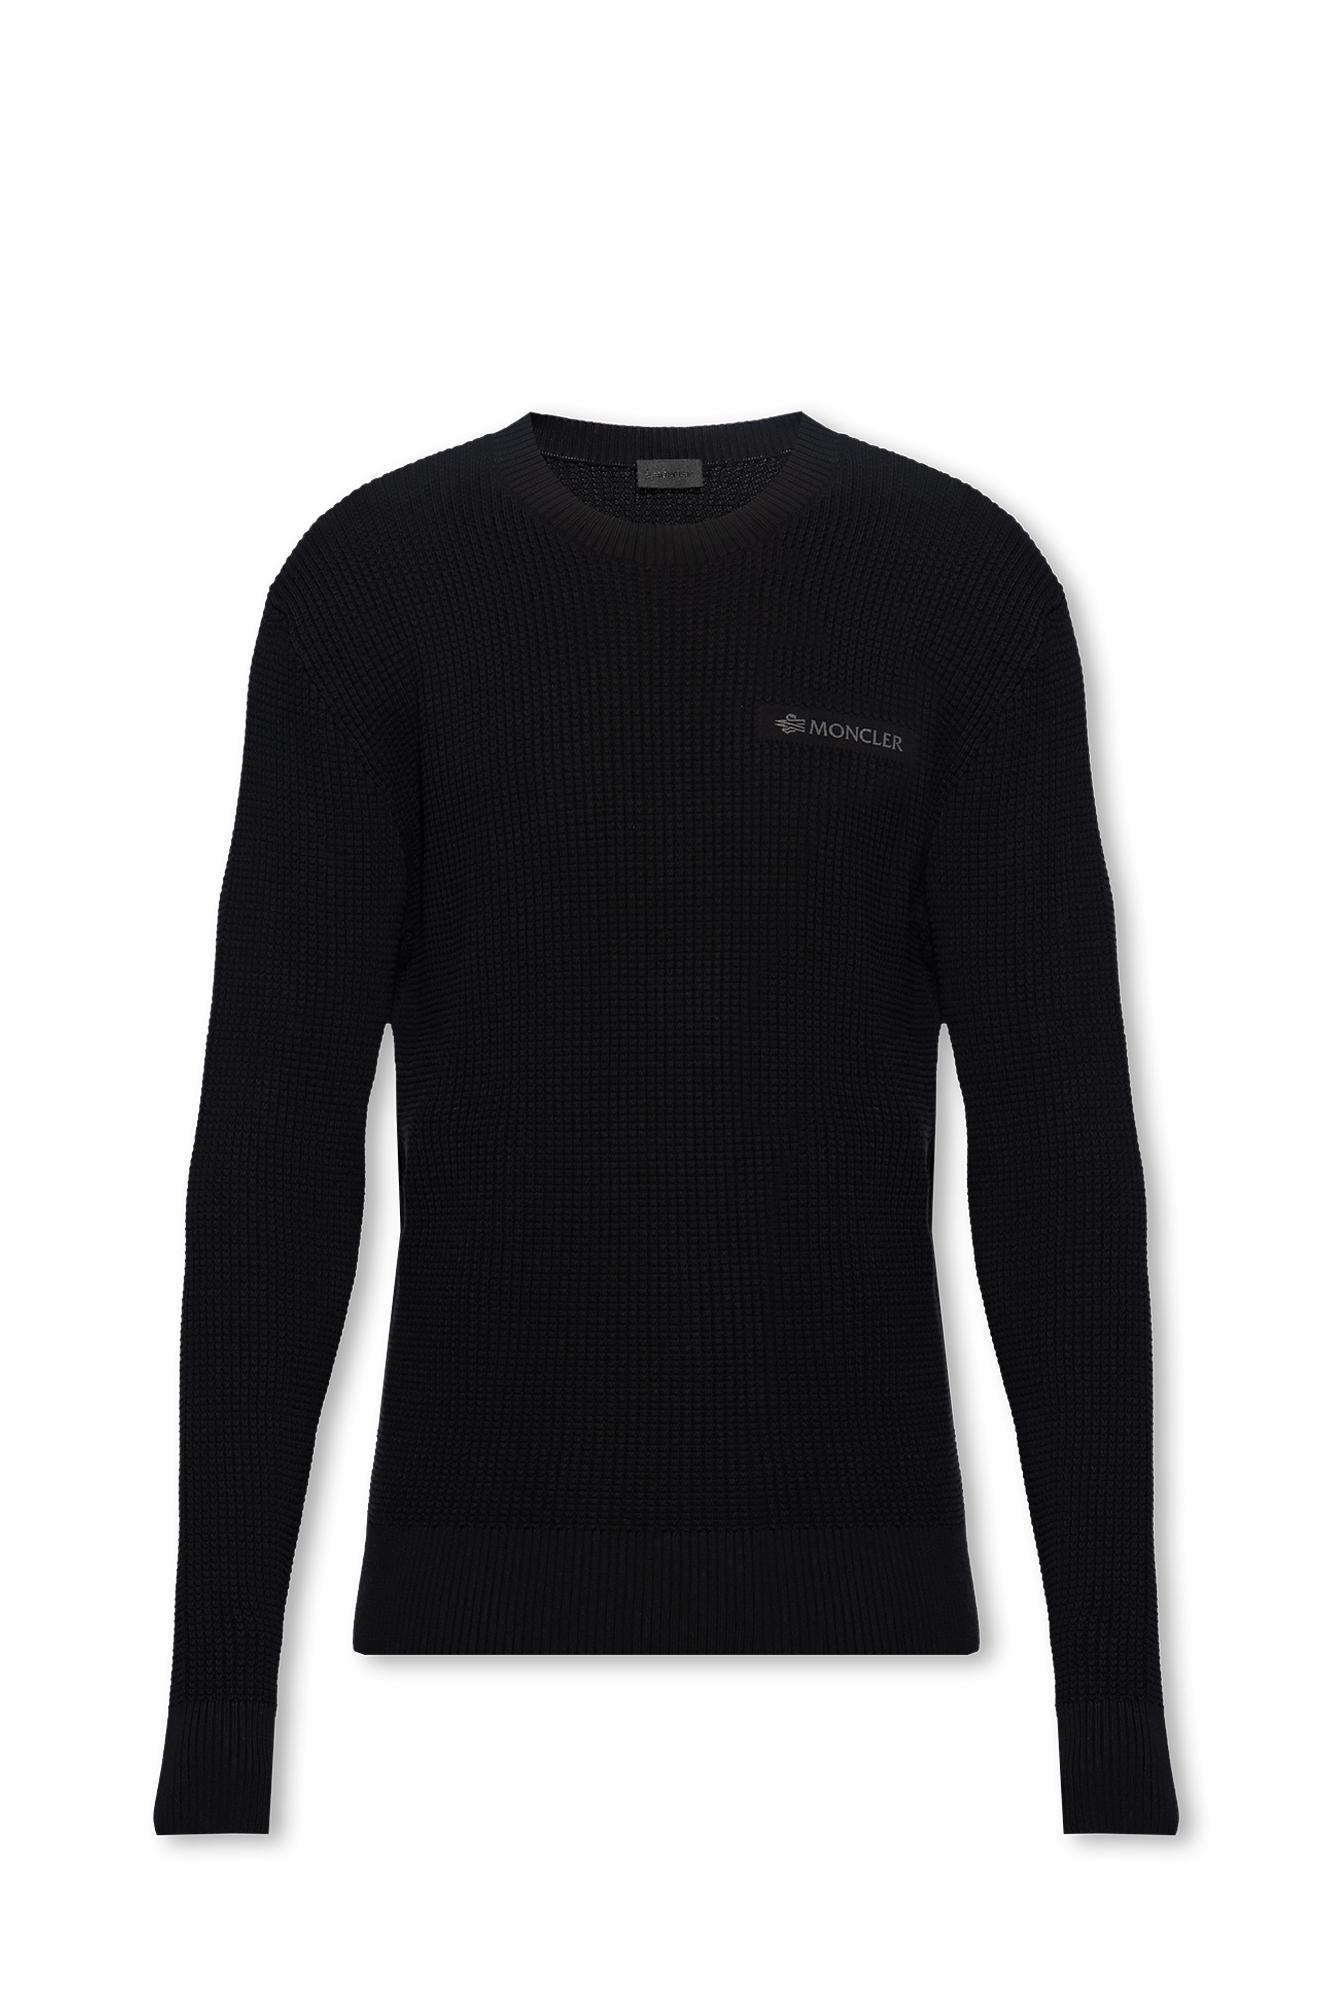 Moncler Cotton Sweater With Logo in Black for Men | Lyst